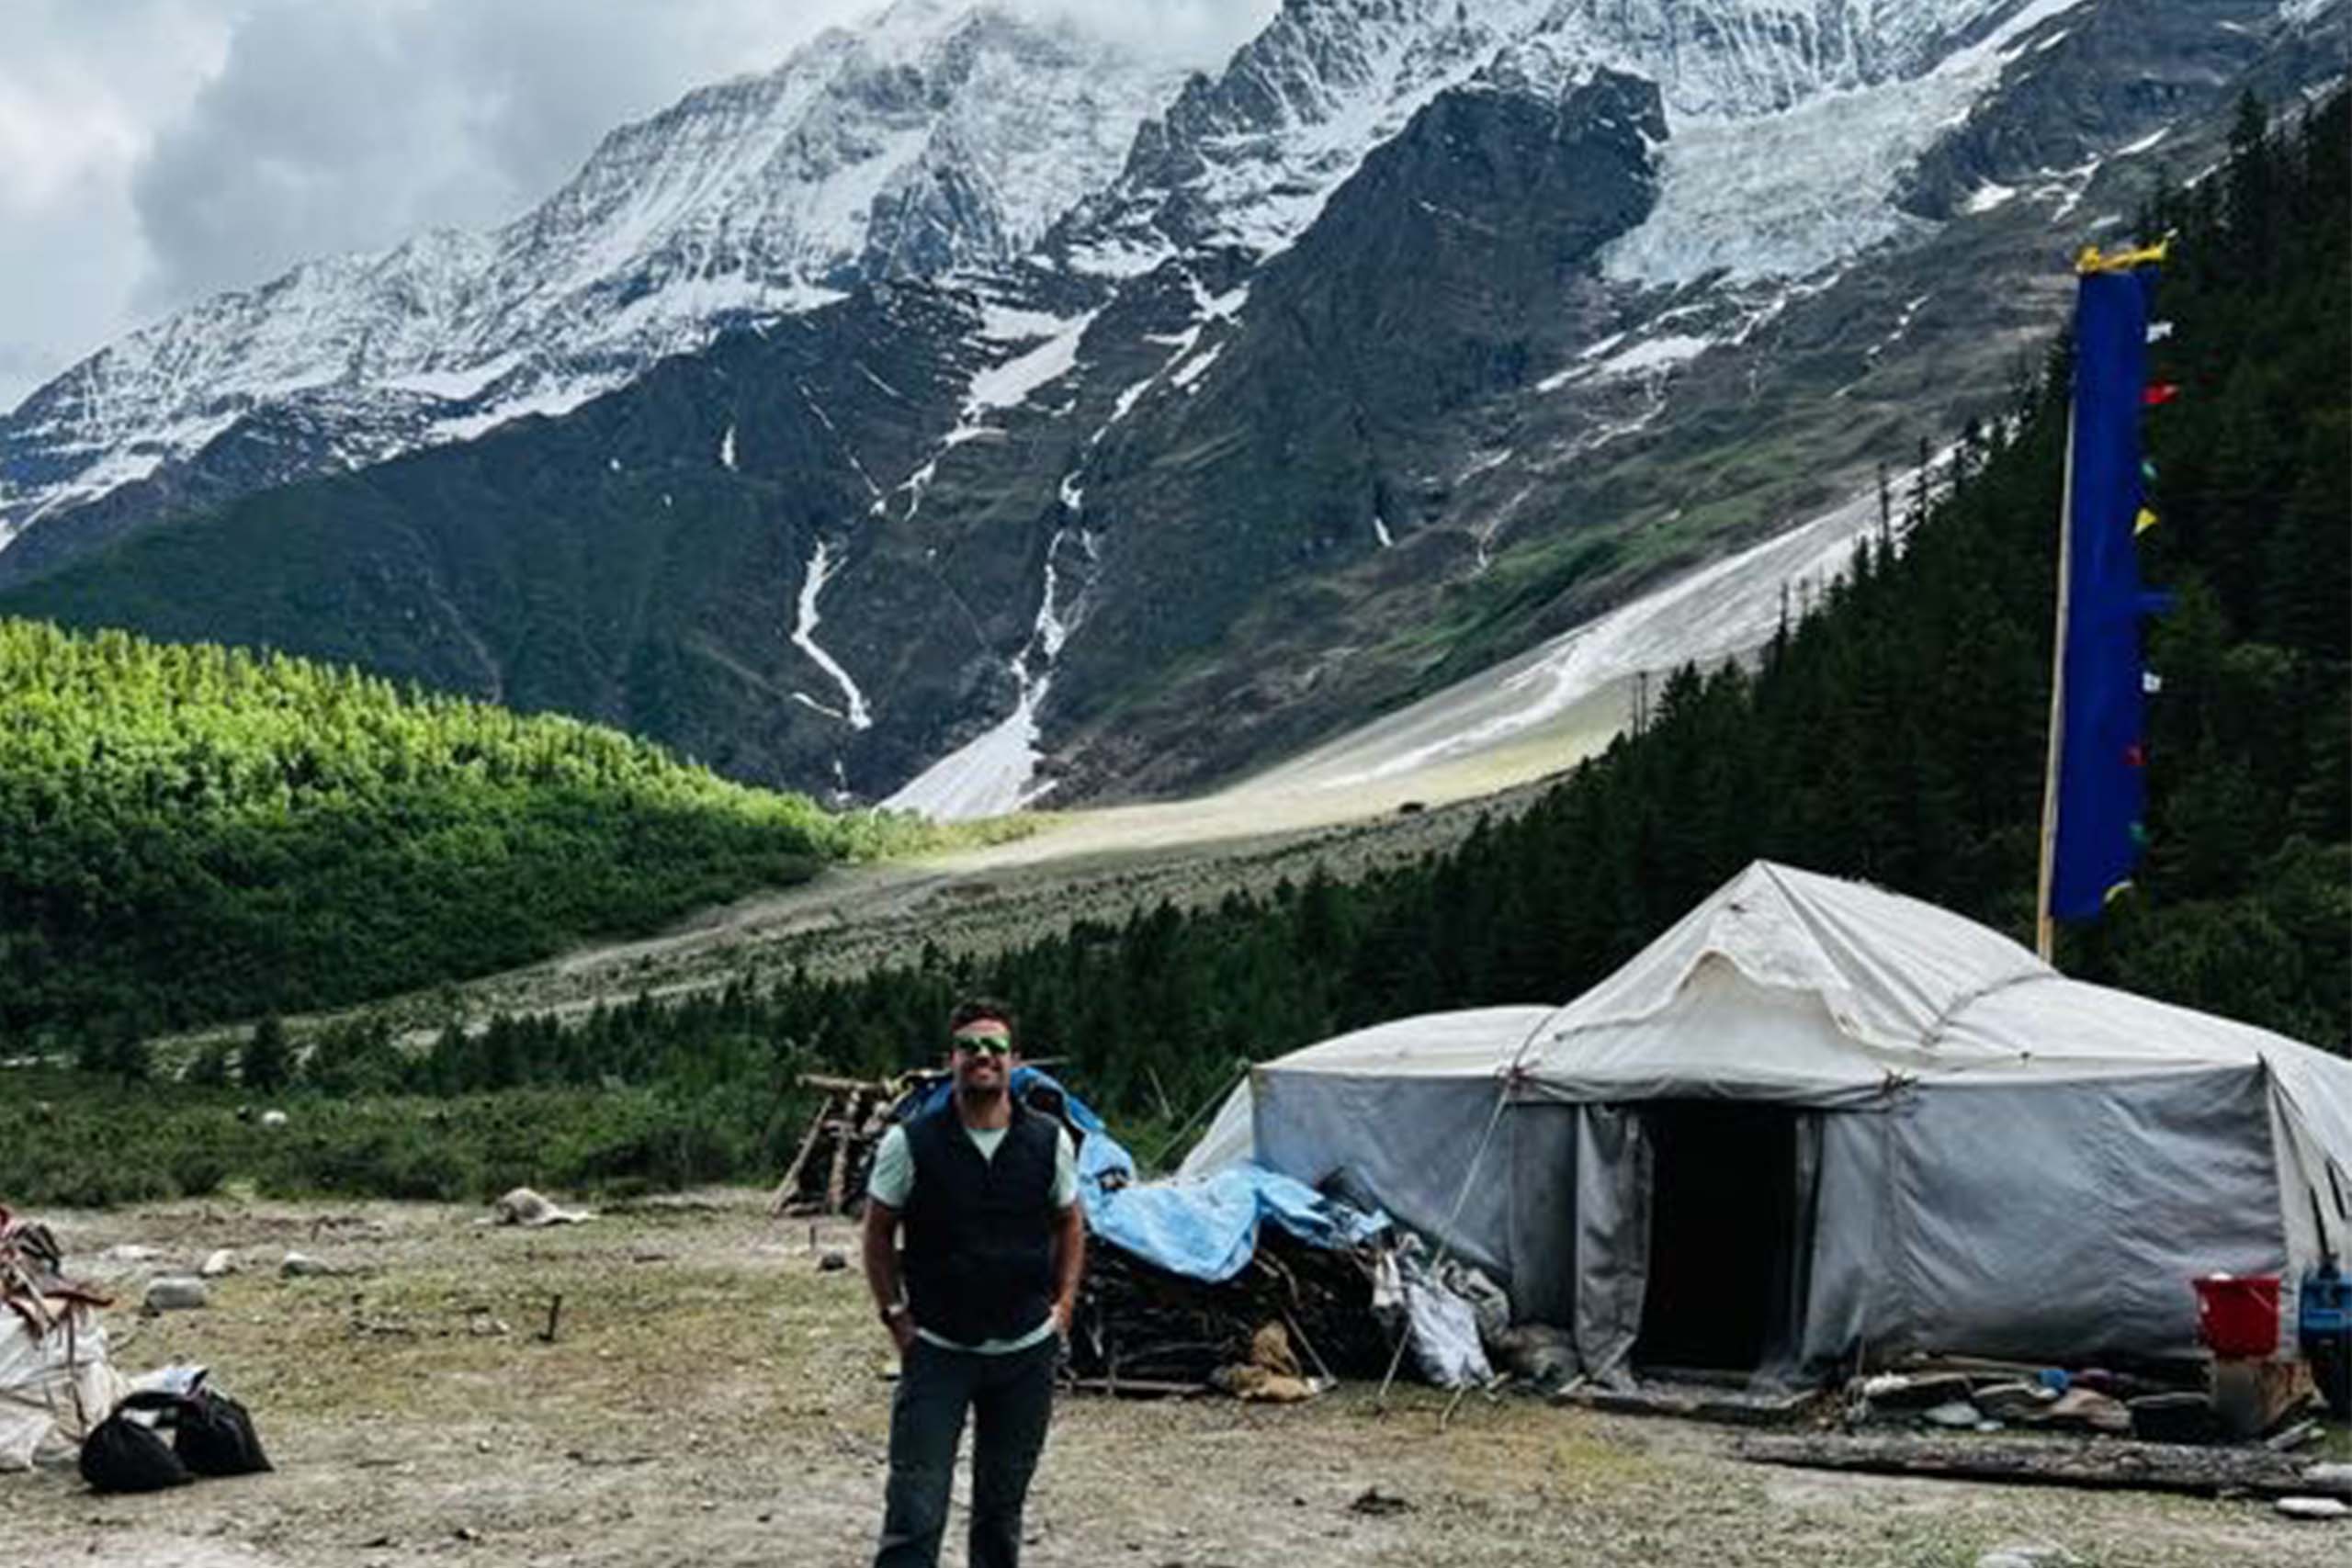 Coles, at a camp in a remote section of the Himalayas. “I enjoy having a new space in the world where I can connect with people and make new friends,” he says.